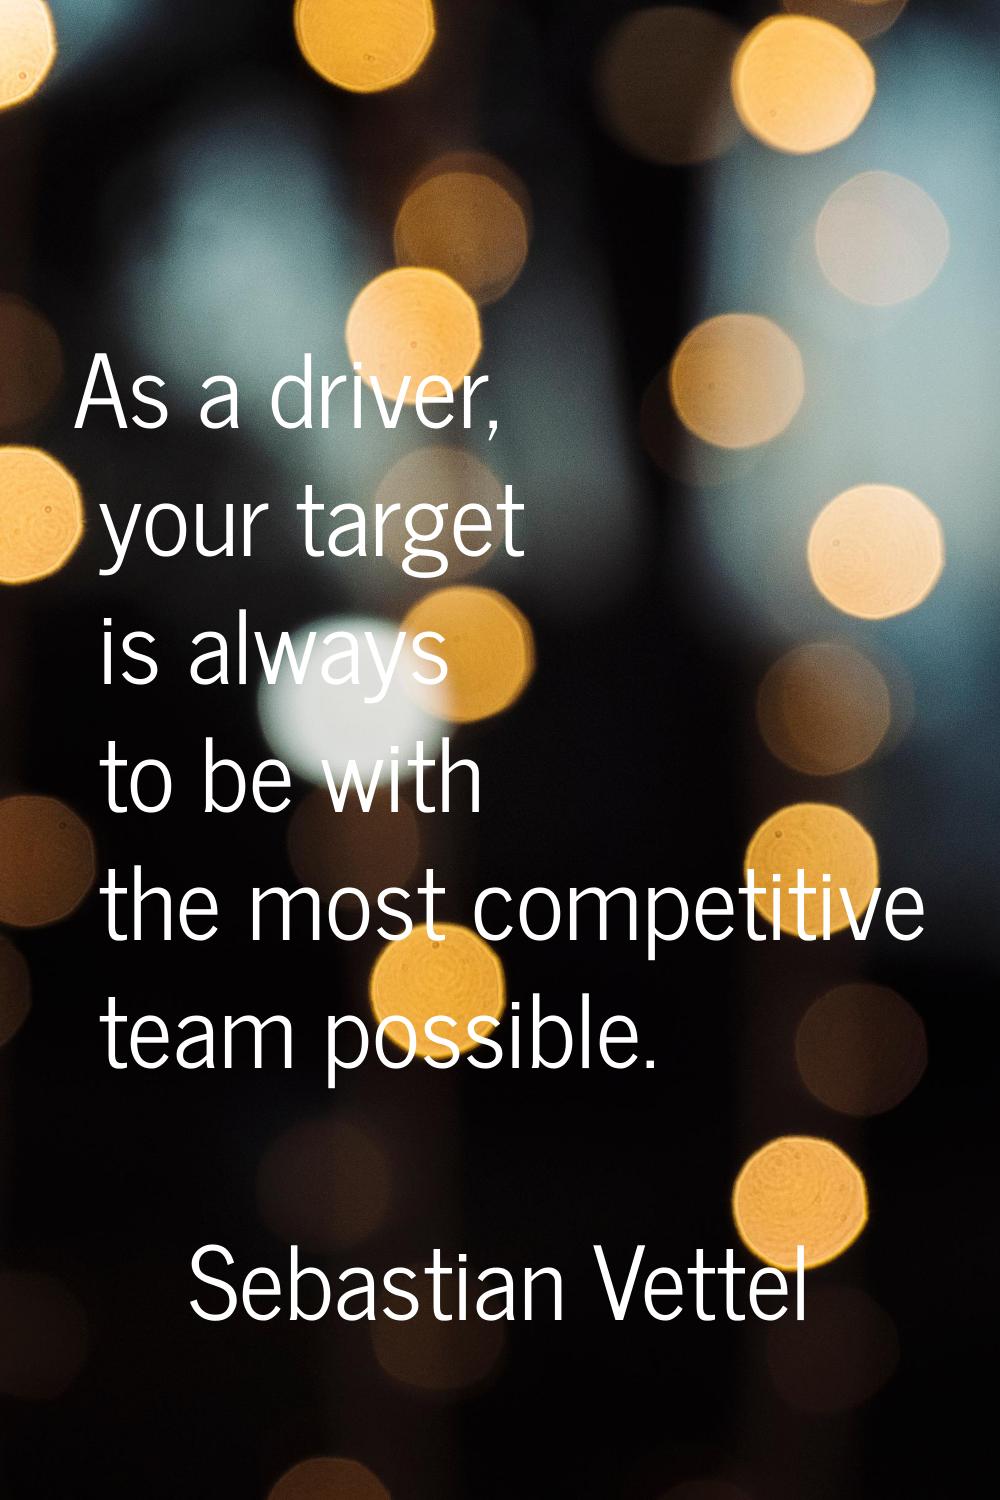 As a driver, your target is always to be with the most competitive team possible.